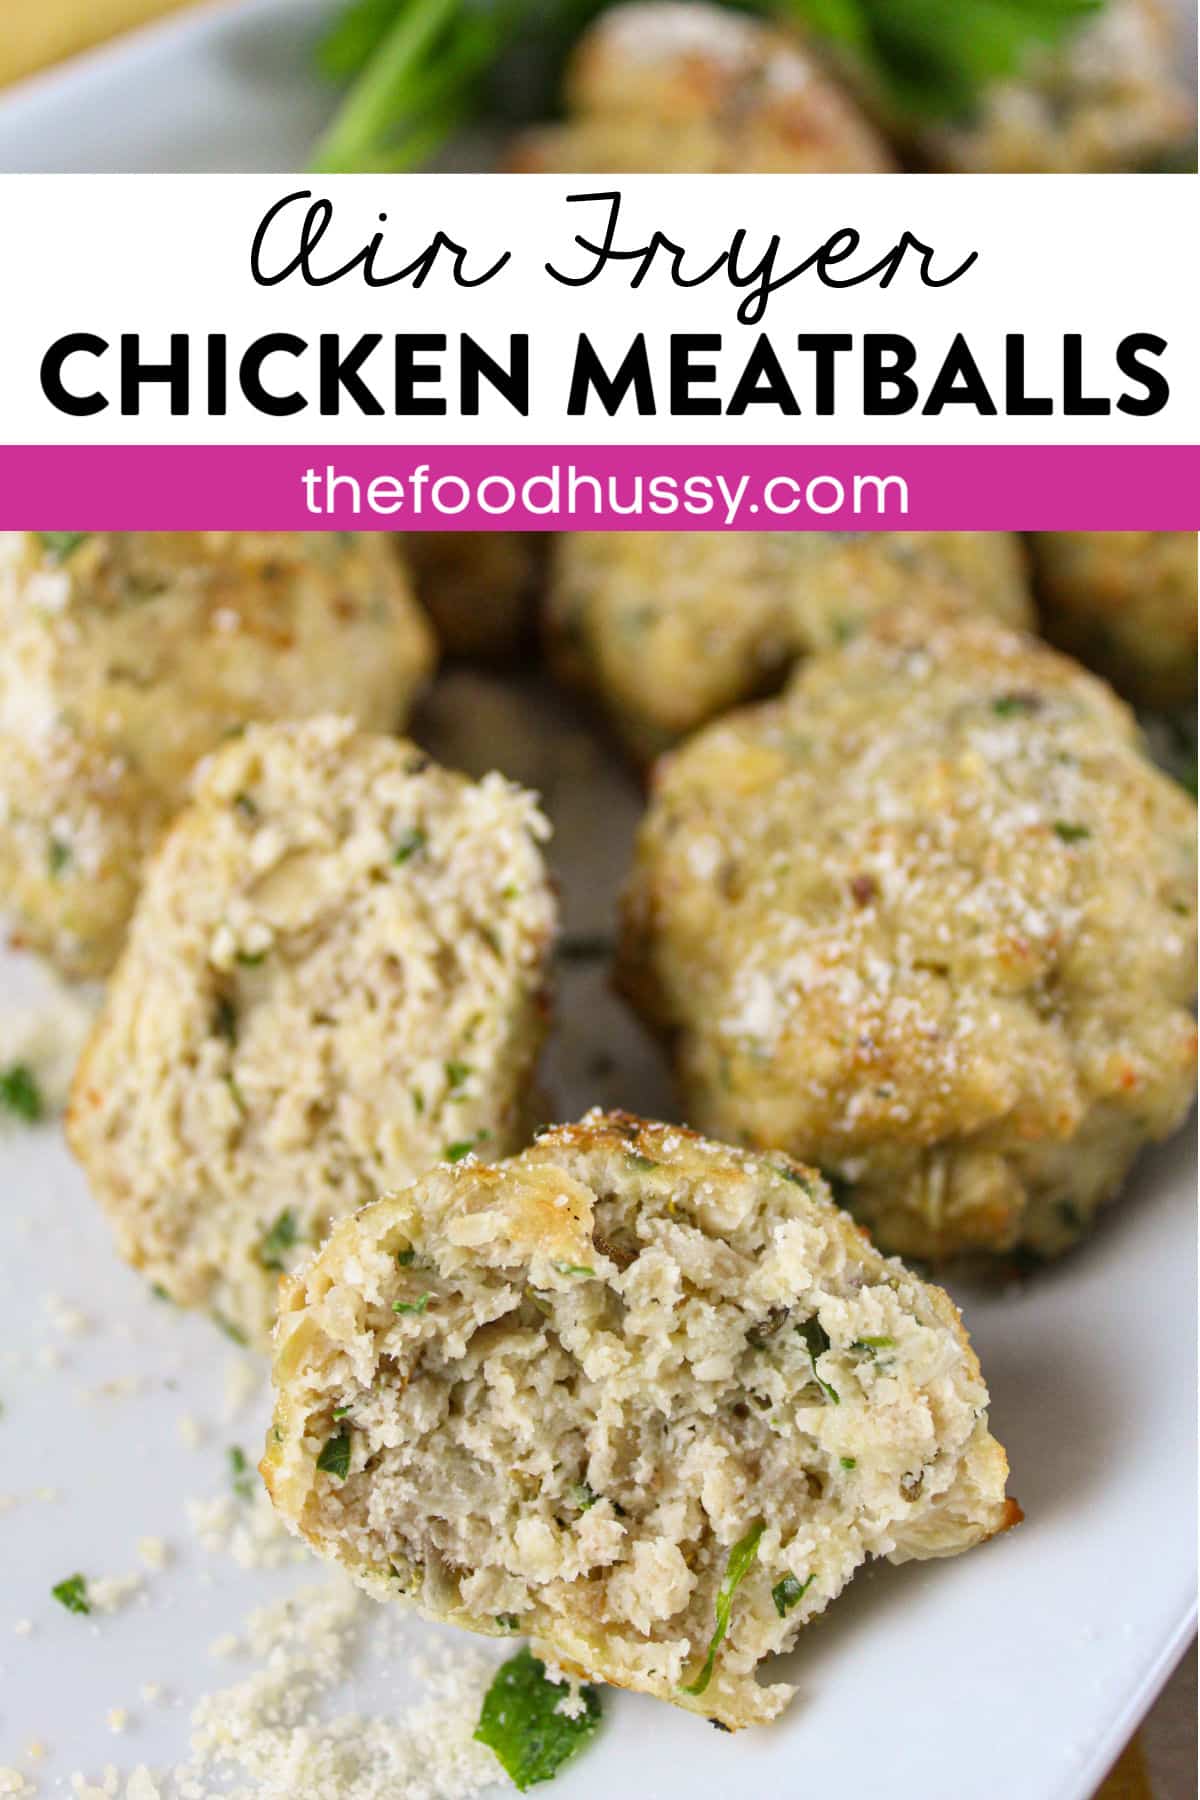 These Air Fryer Chicken Meatballs are a new favorite! Light and full of flavor from all the fresh herbs. They're great with pasta, on a sandwich or as an appetizer! (And they're healthy!) via @foodhussy